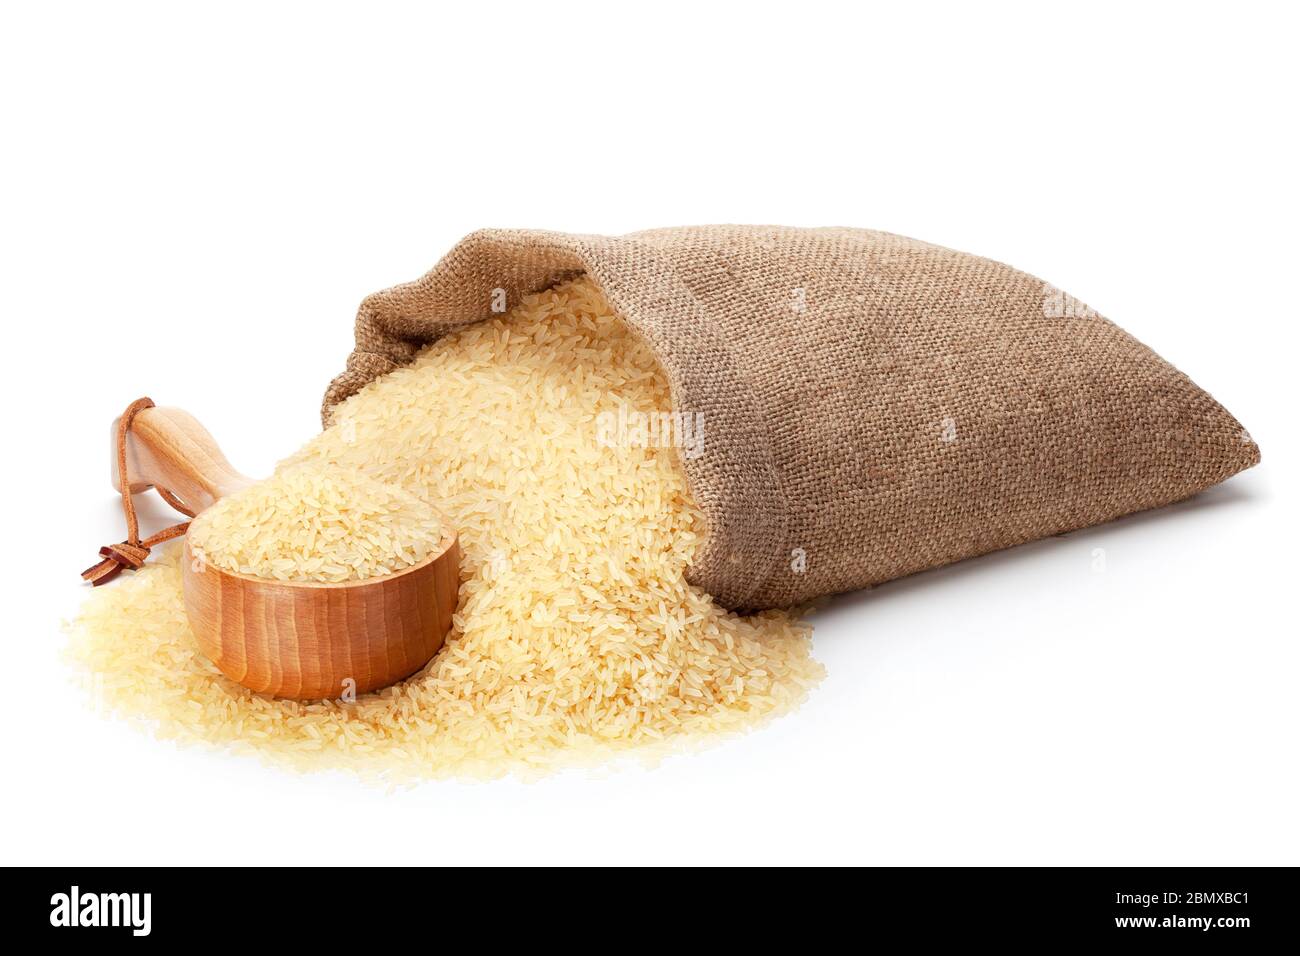 Rice in burlap sack and woodenware, isolated on the white background. Stock Photo